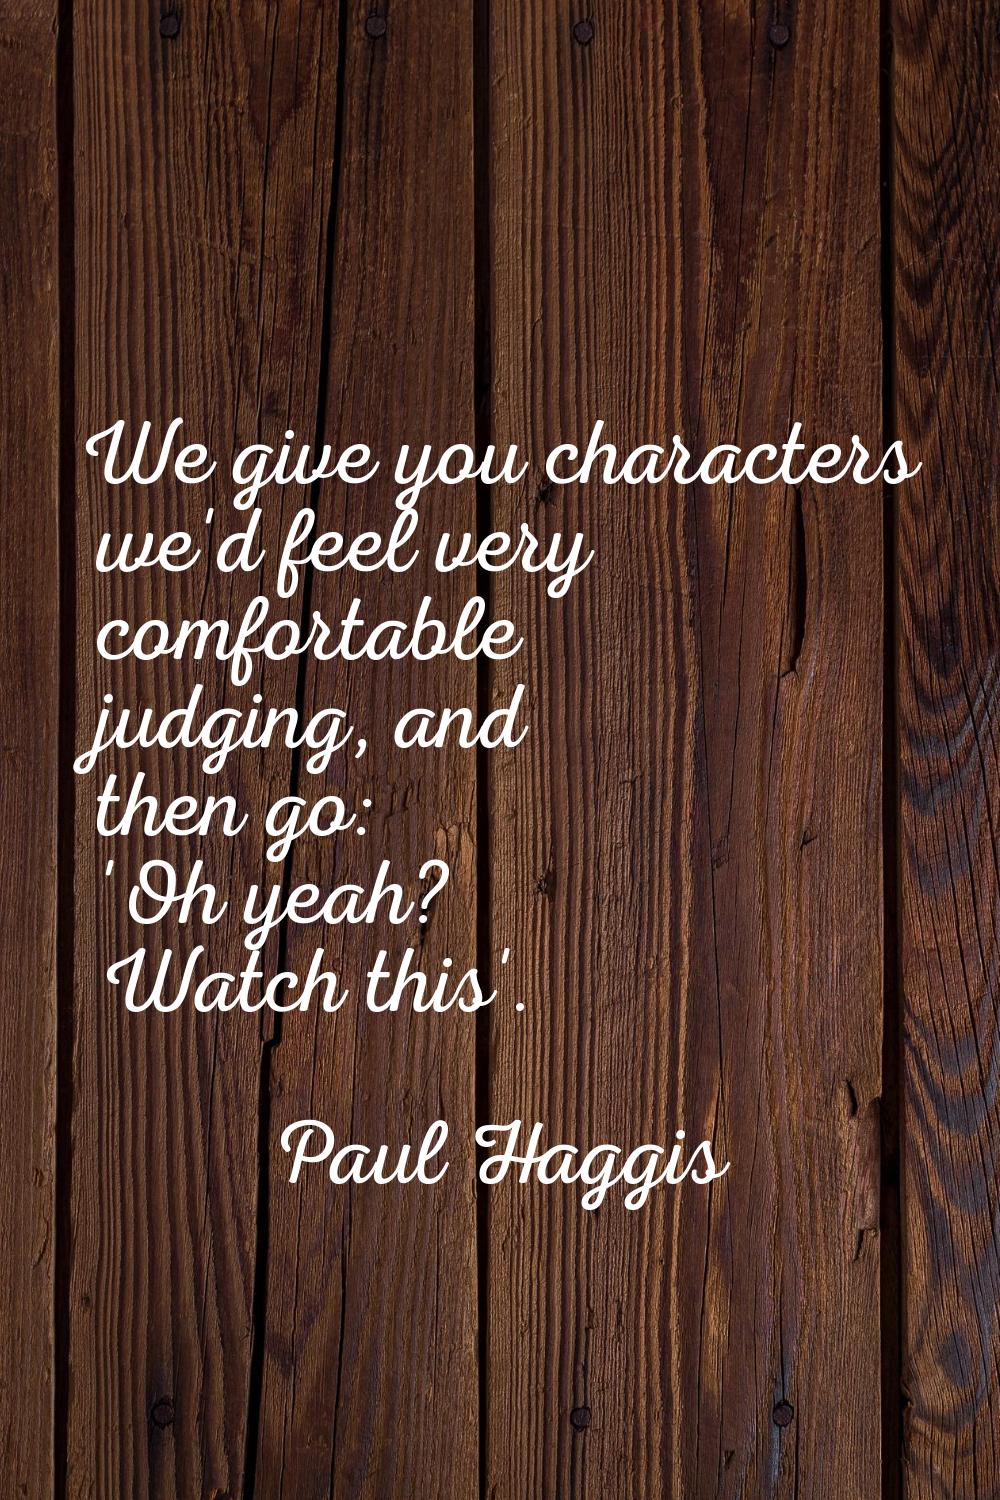 We give you characters we'd feel very comfortable judging, and then go: 'Oh yeah? Watch this'.